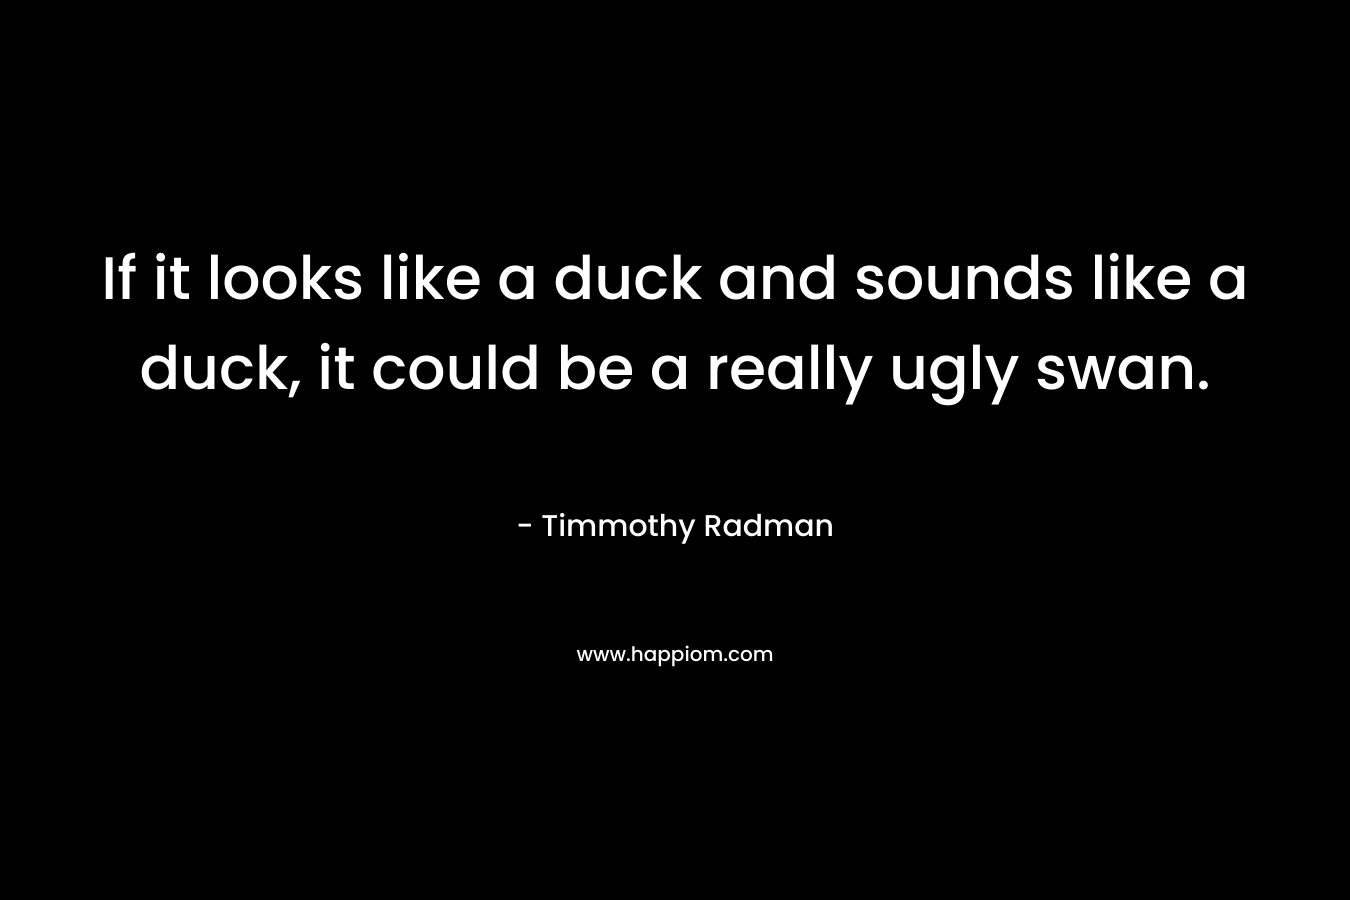 If it looks like a duck and sounds like a duck, it could be a really ugly swan. – Timmothy Radman